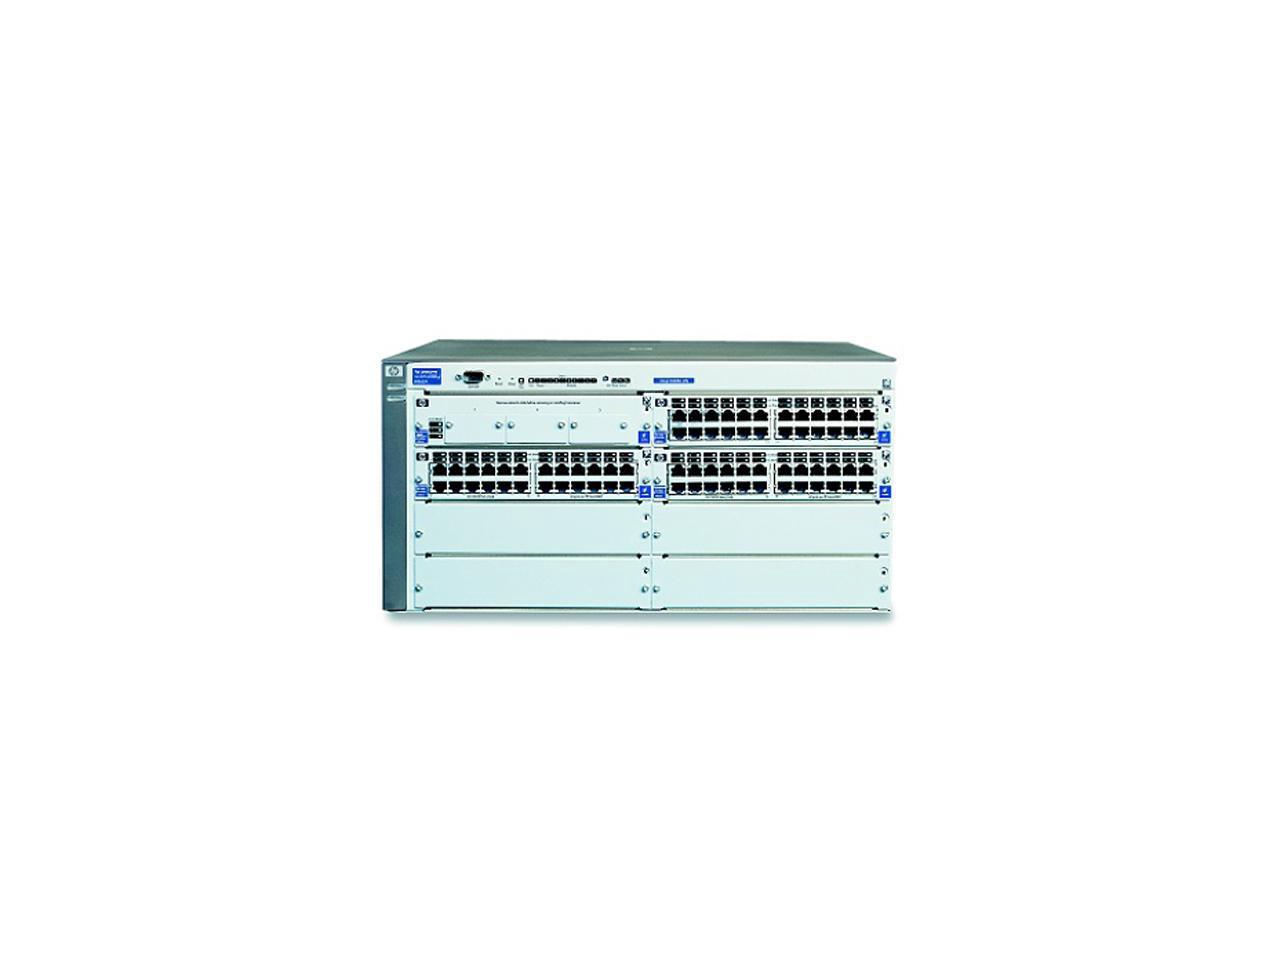 HP ProCurve 4108gl 8-Slot Switch Chassis with 1 Power Supply Module